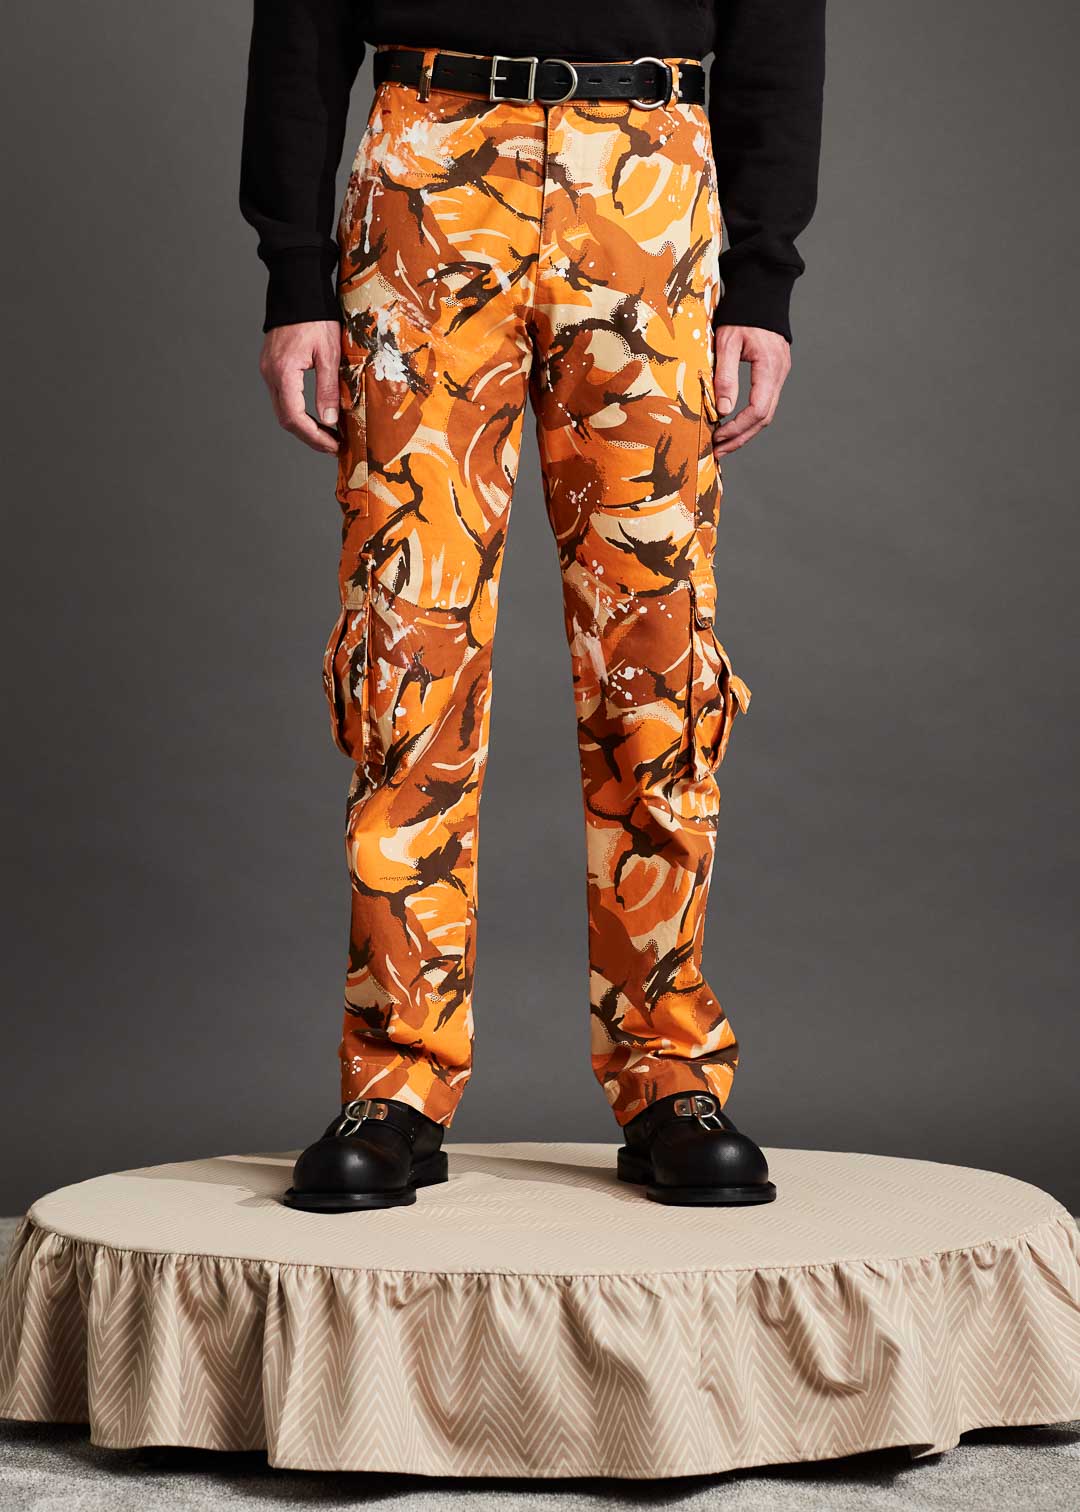 Konnie Orange Camo Cargo Trousers from Missy Empire on 21 Buttons